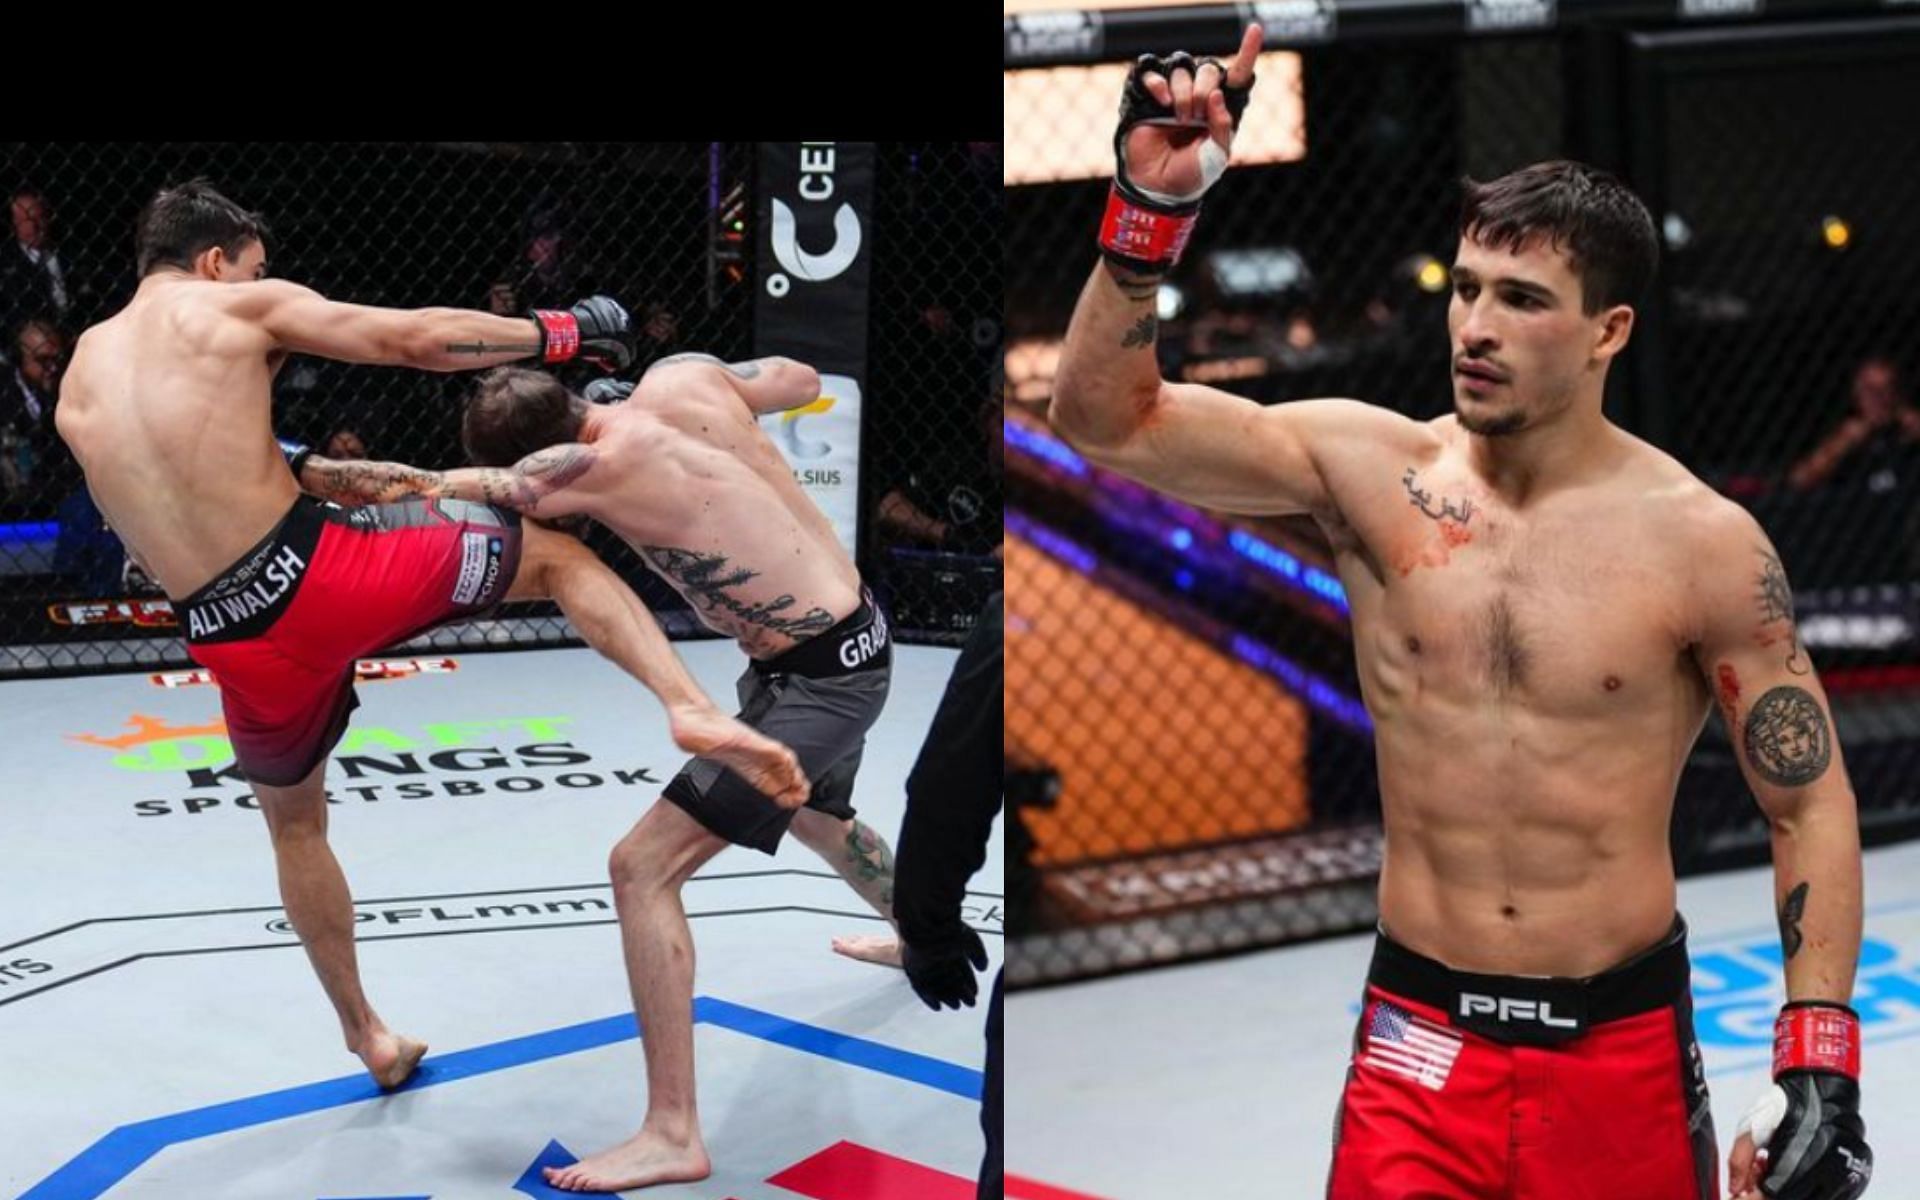 Biaggio Ali Walsh vs. Tom Graesser at PFL World Championships (left) and Ali Walsh celebrating victory (right) [Images courtesy: @biaggioaliwalsh on Instagram]